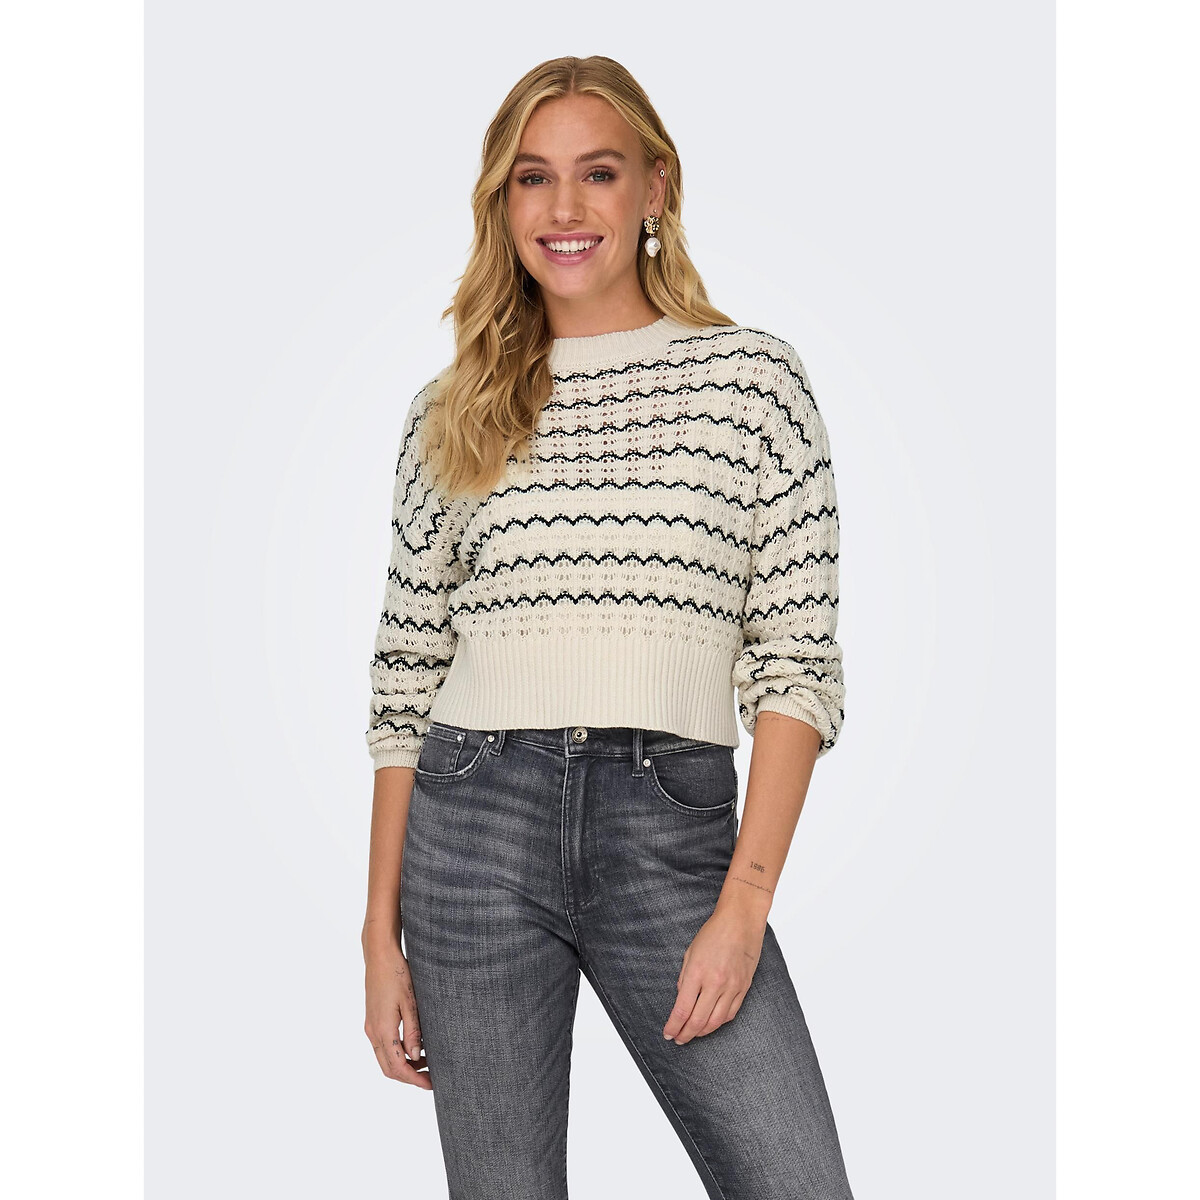 Striped Cotton Mix Jumper in Fine Knit with Crew Neck